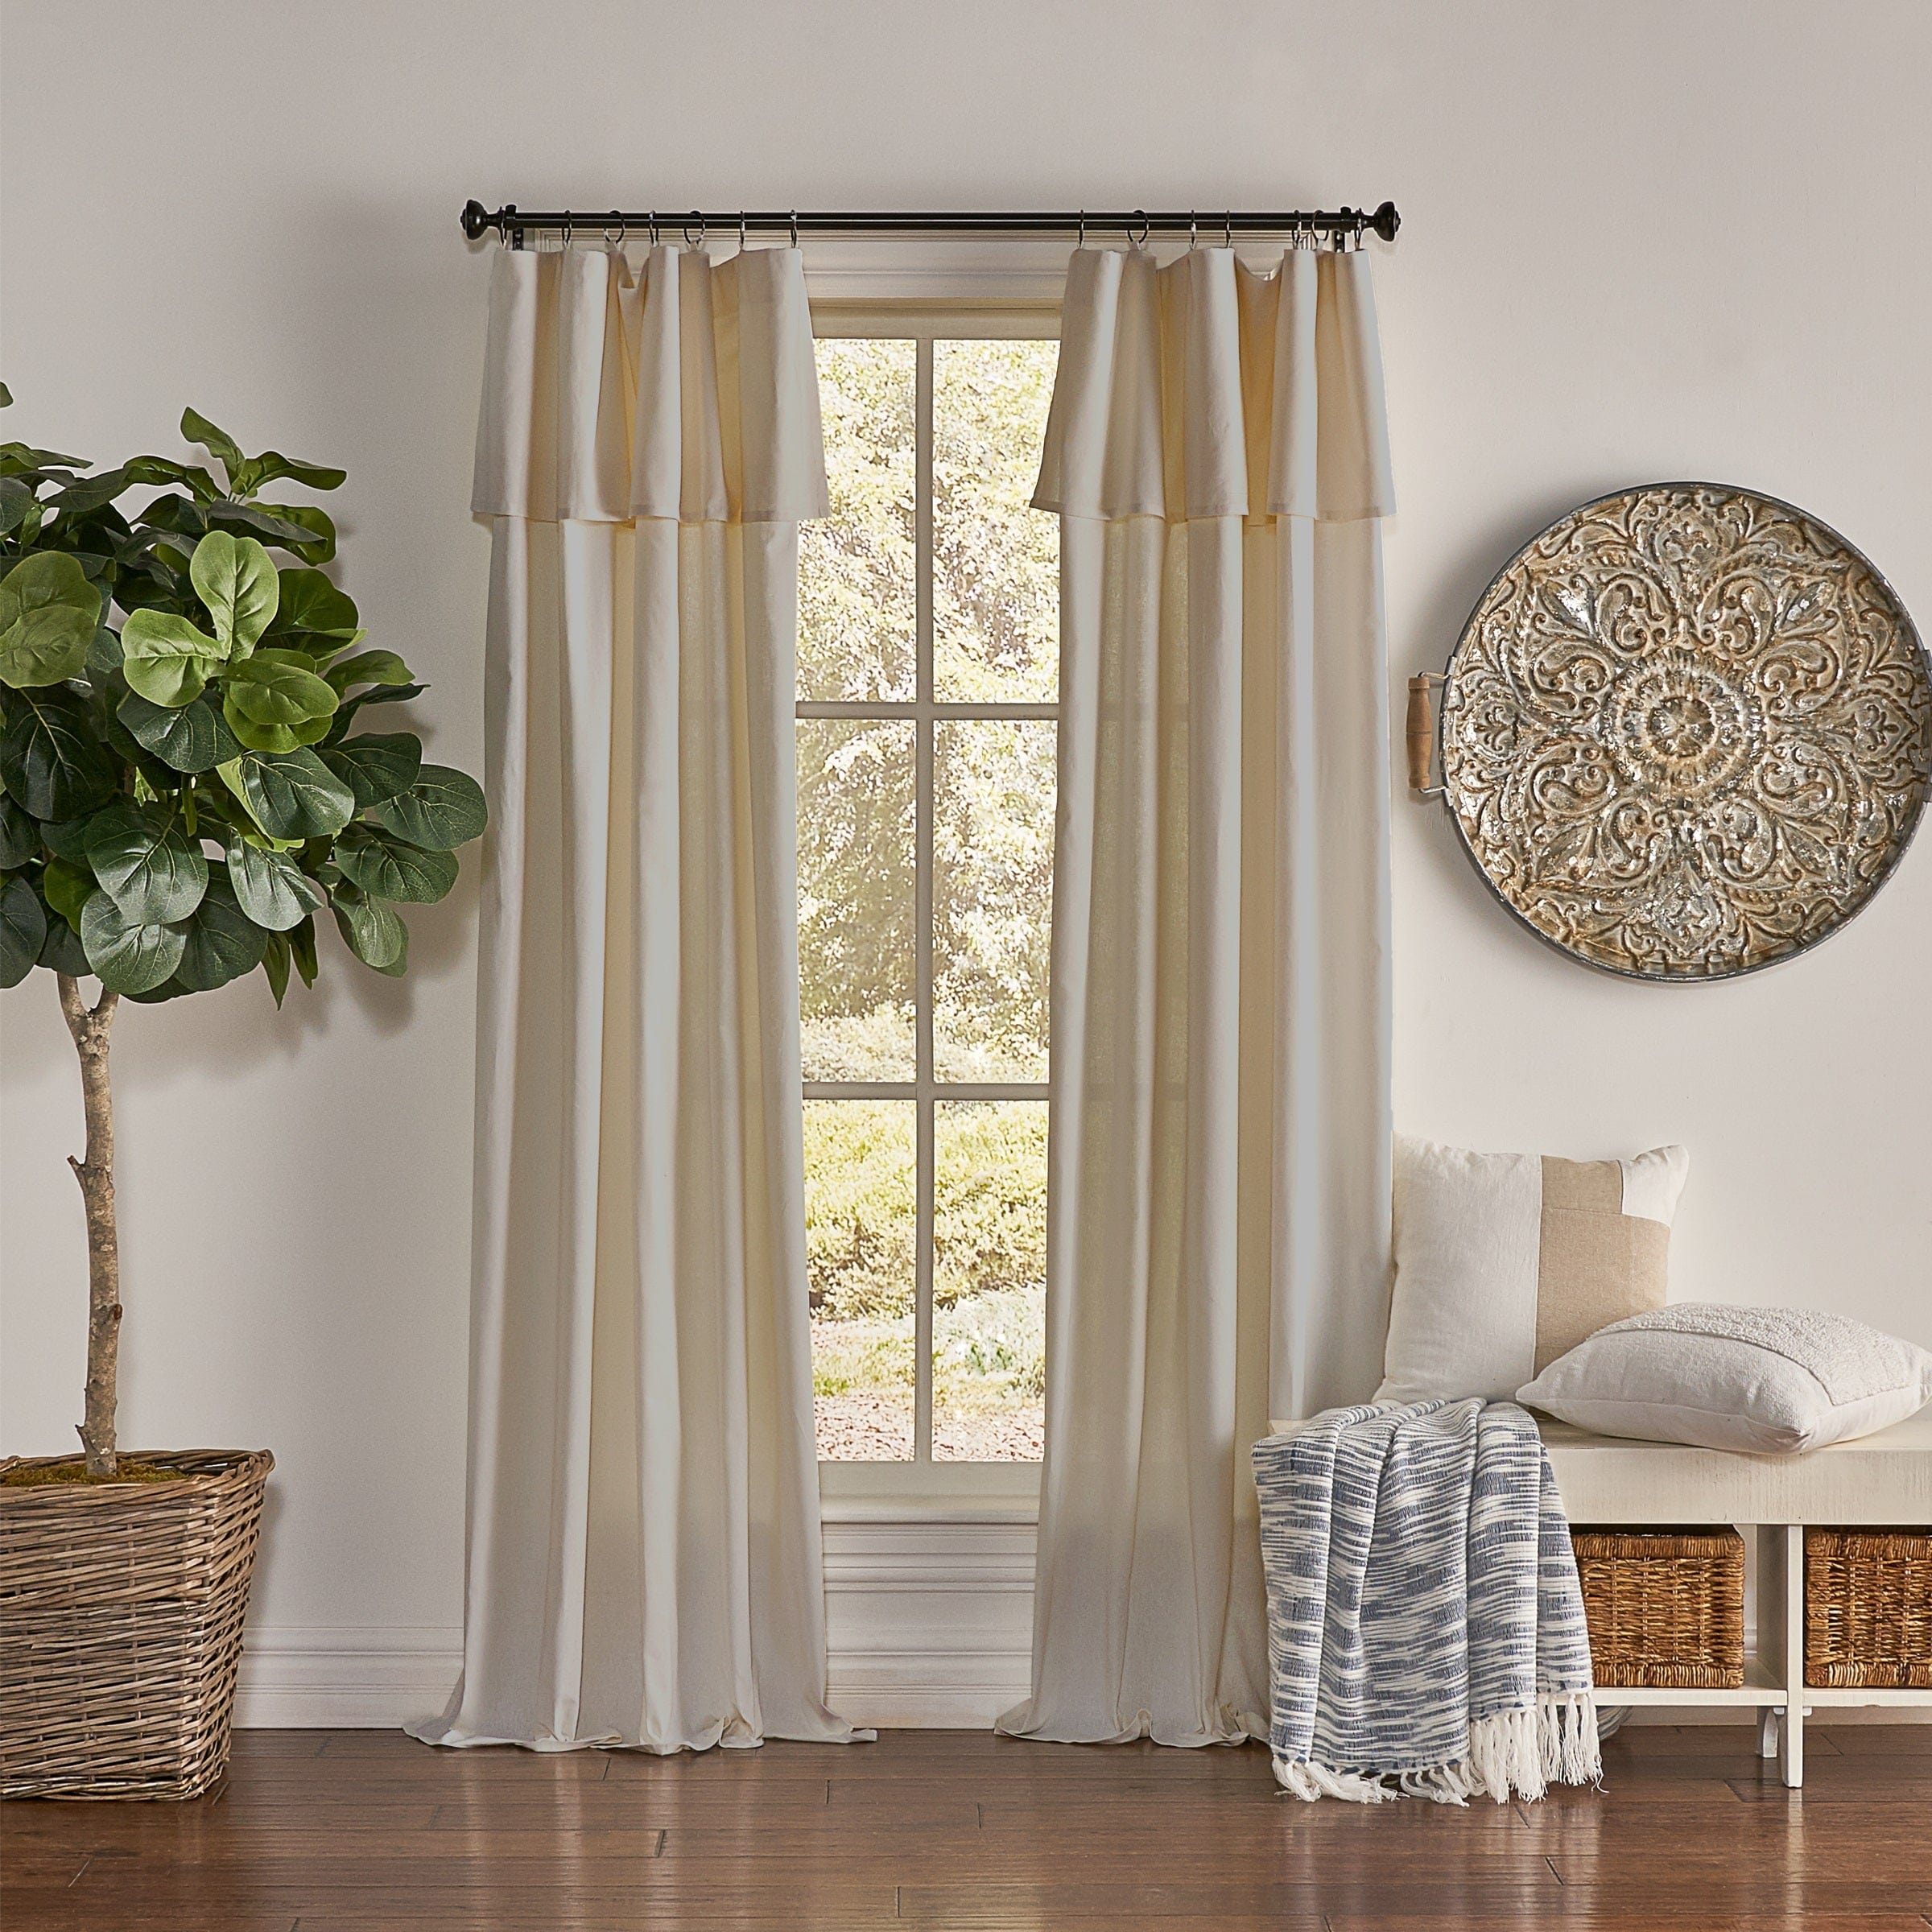 SureFit Mercantile Drop Cloth Solid Curtain Panel with Valance in Linen 50 x 84